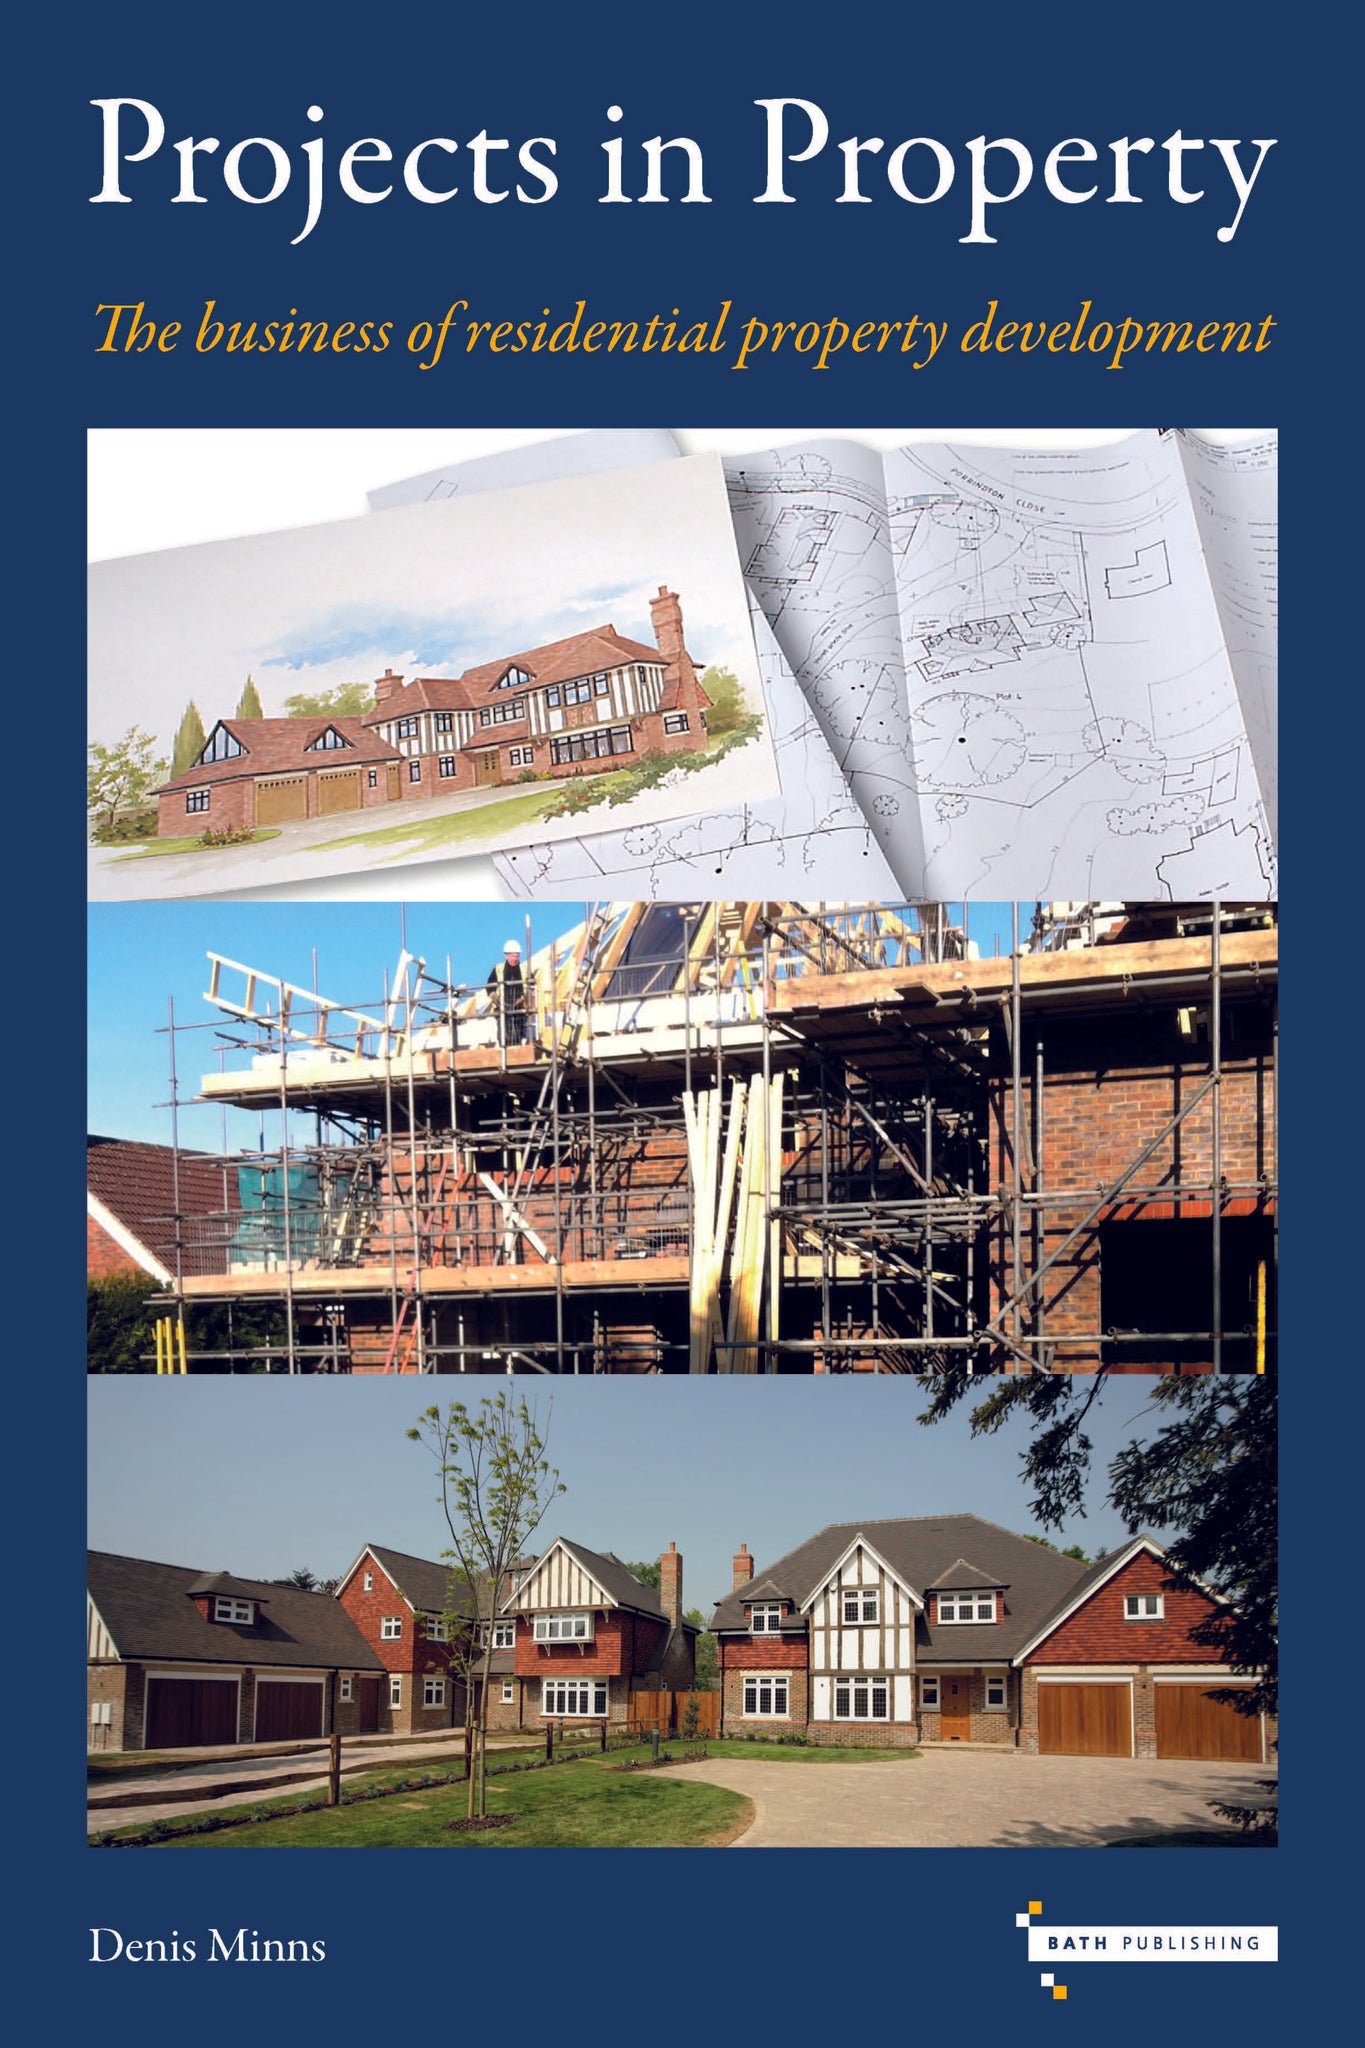 Projects in Property: The business of residential property development